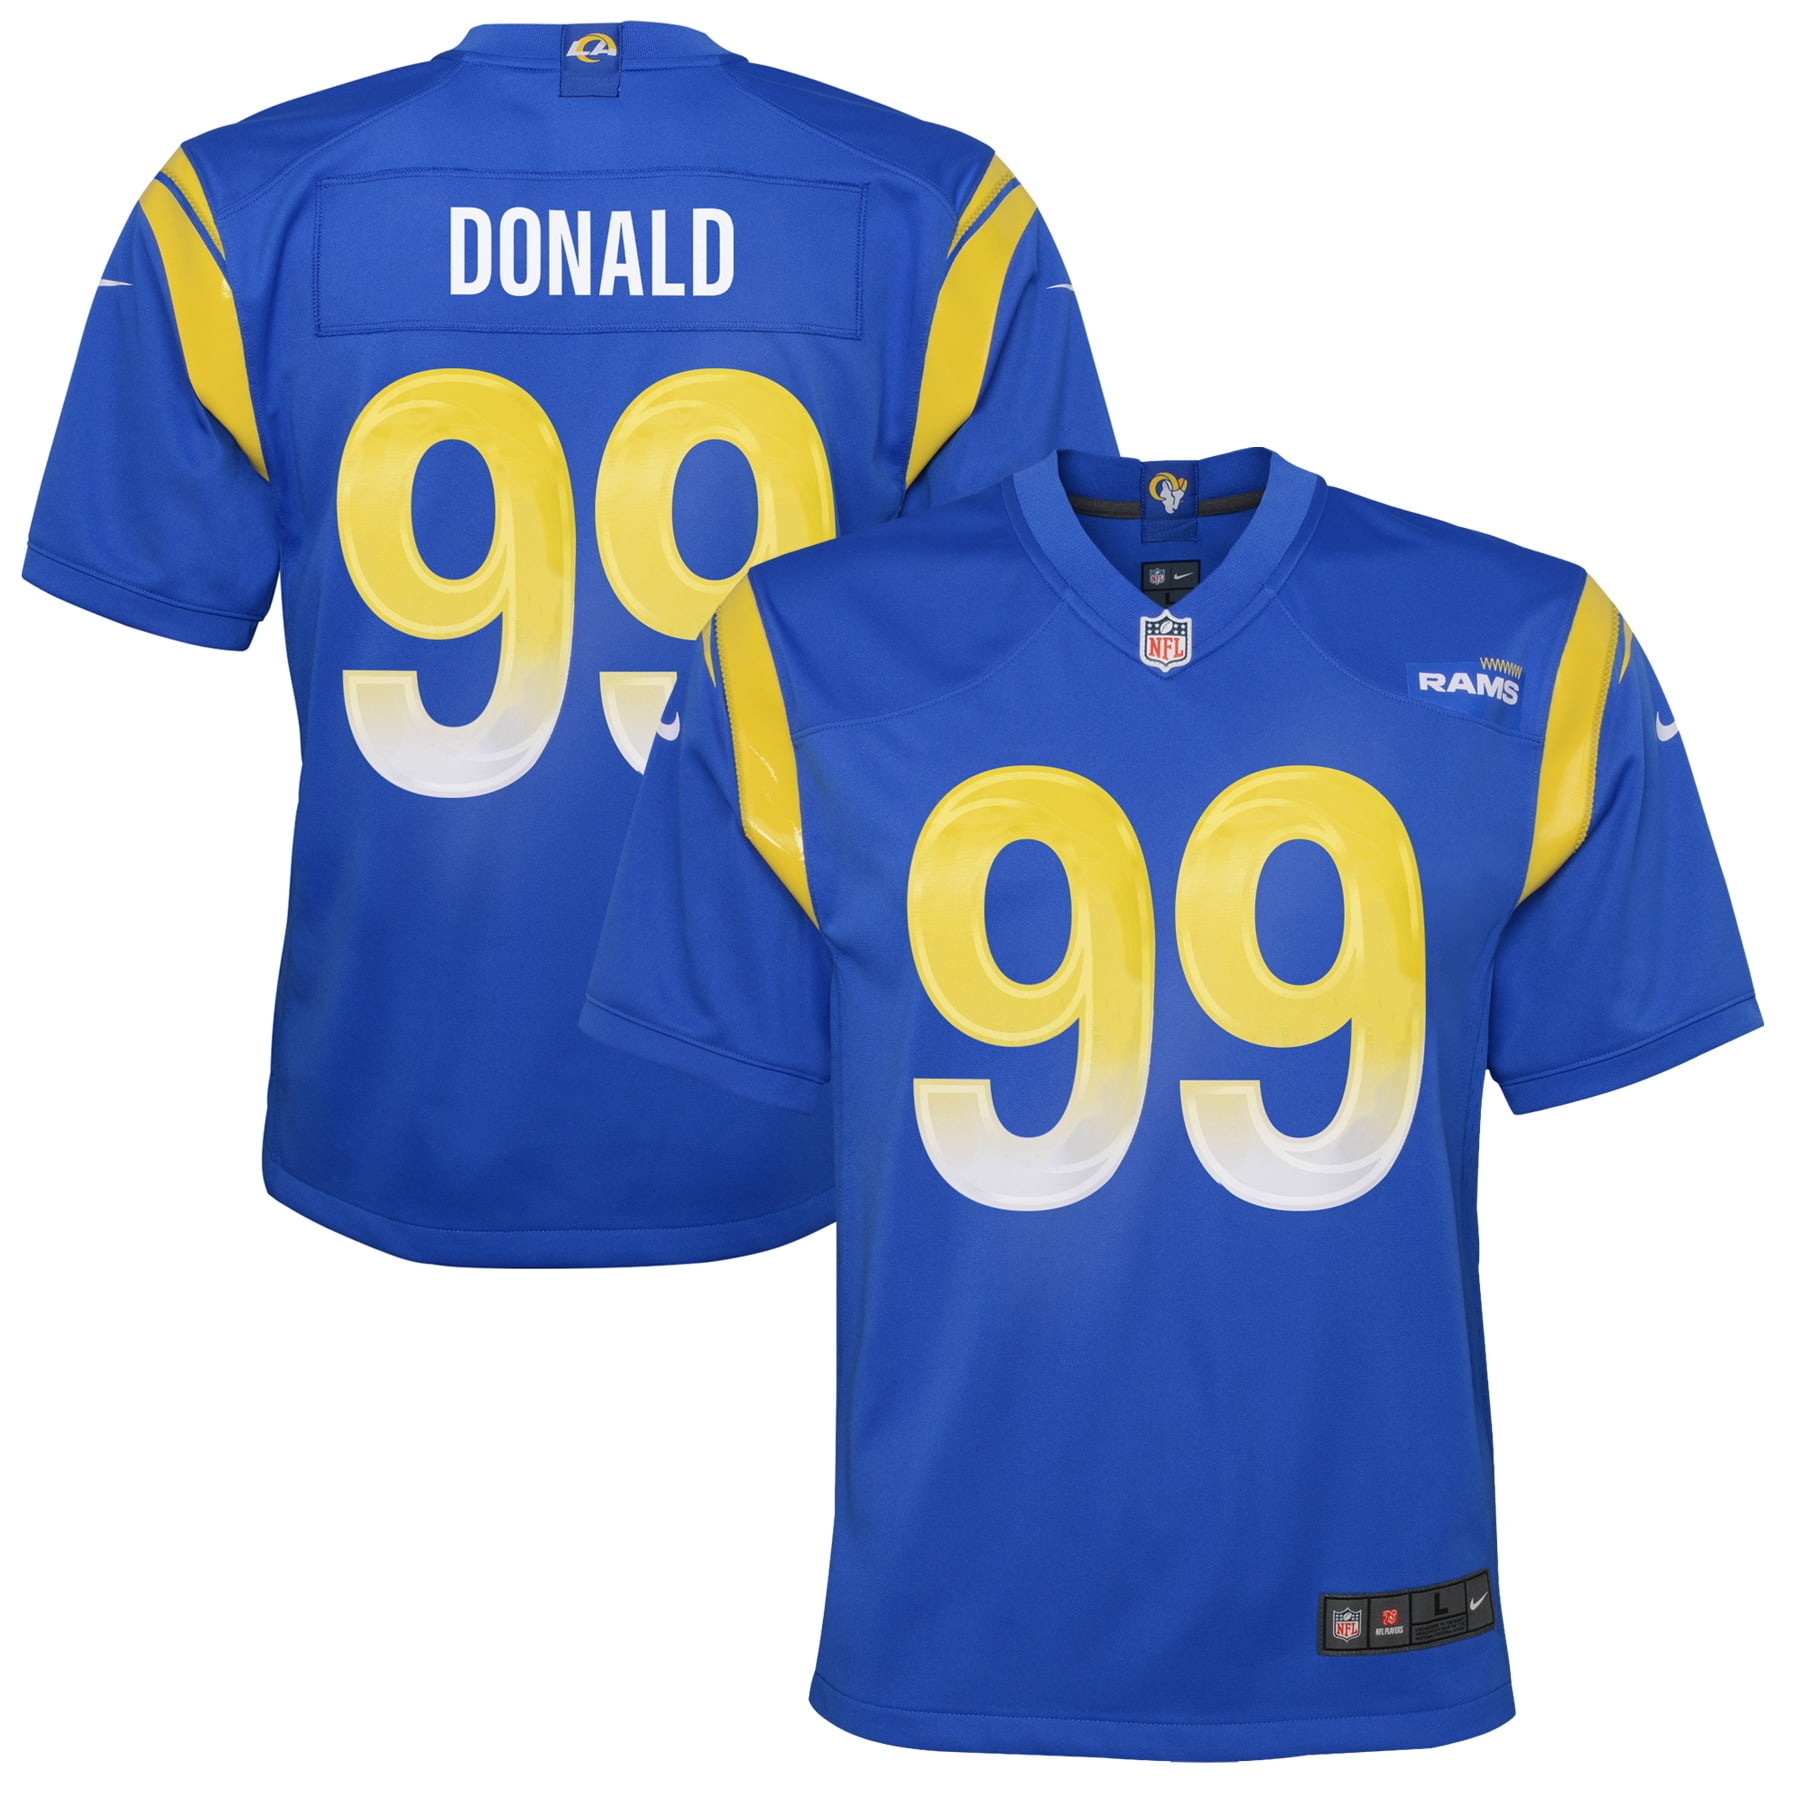 Outerstuff Youth Aaron Donald Royal Los Angeles Rams Replica Player Jersey 